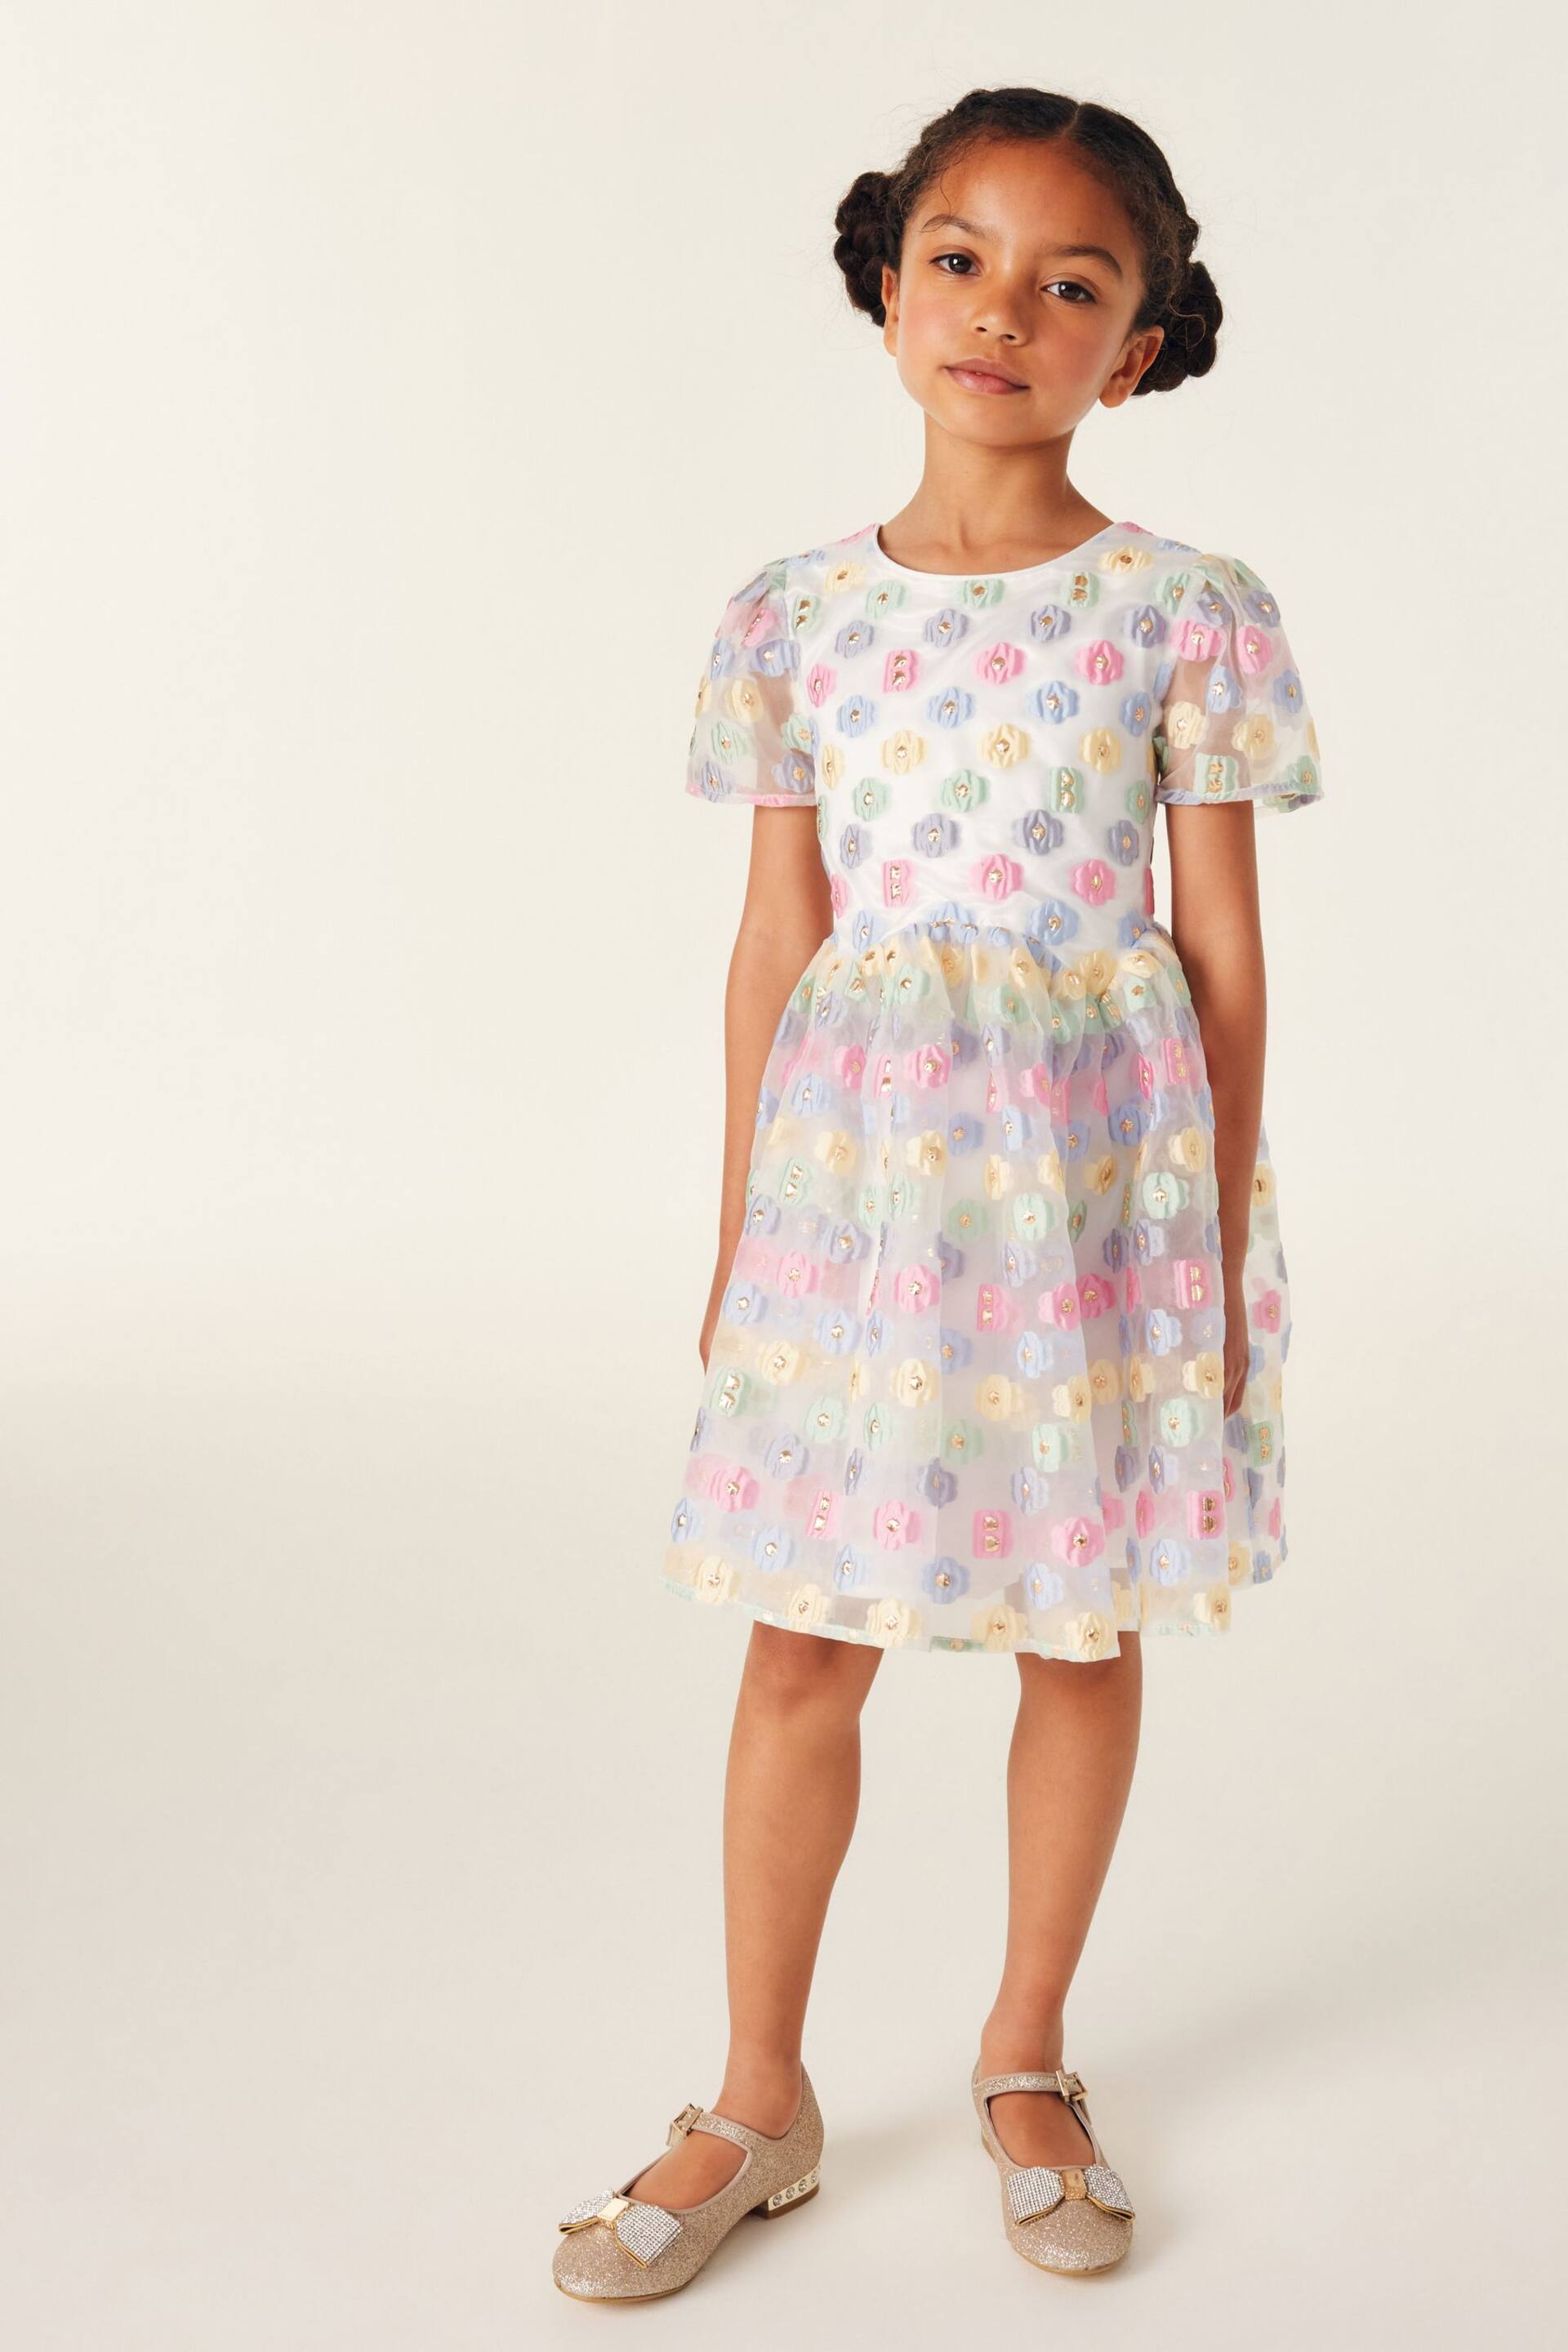 Baker by Ted Baker Multicolour Organza Dress - Image 2 of 8